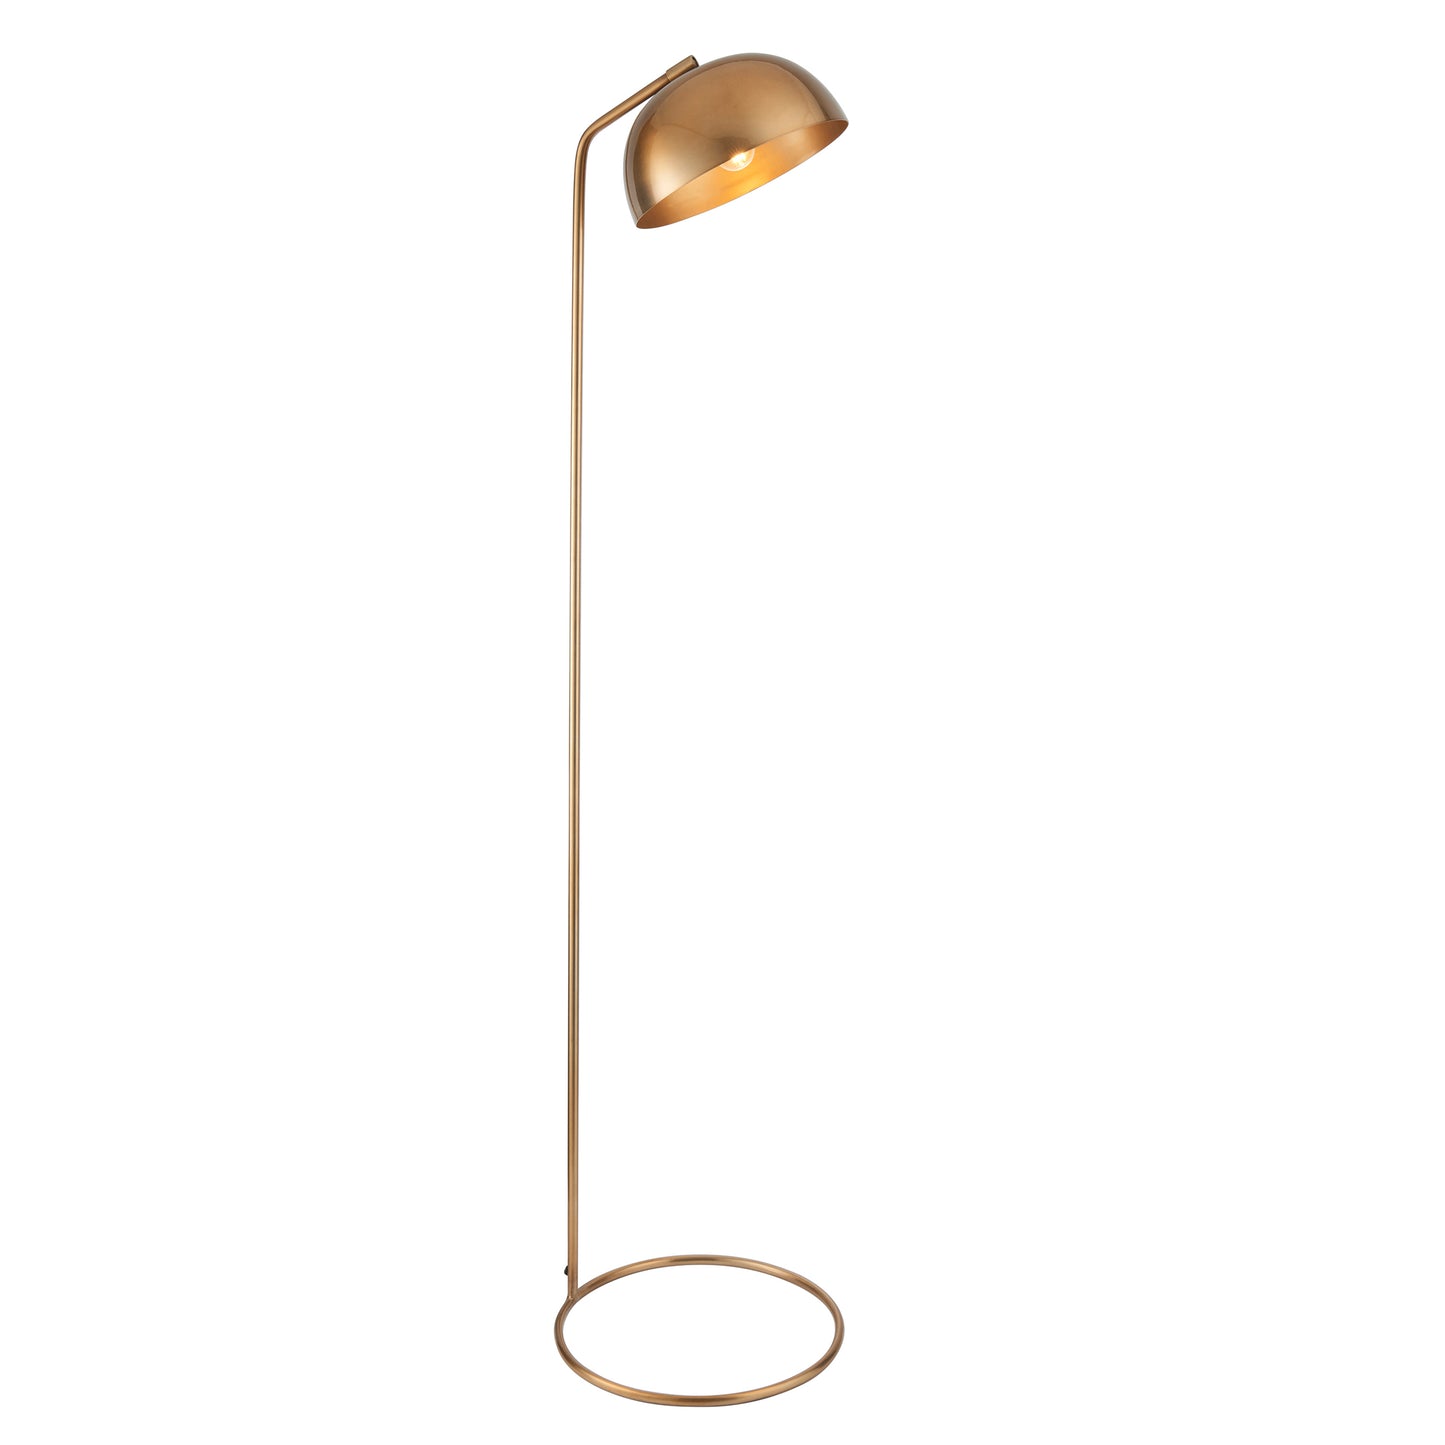 A Diptford 1 Floor Light Antique Brass from Kikiathome.co.uk showcasing interior decor on a white background.